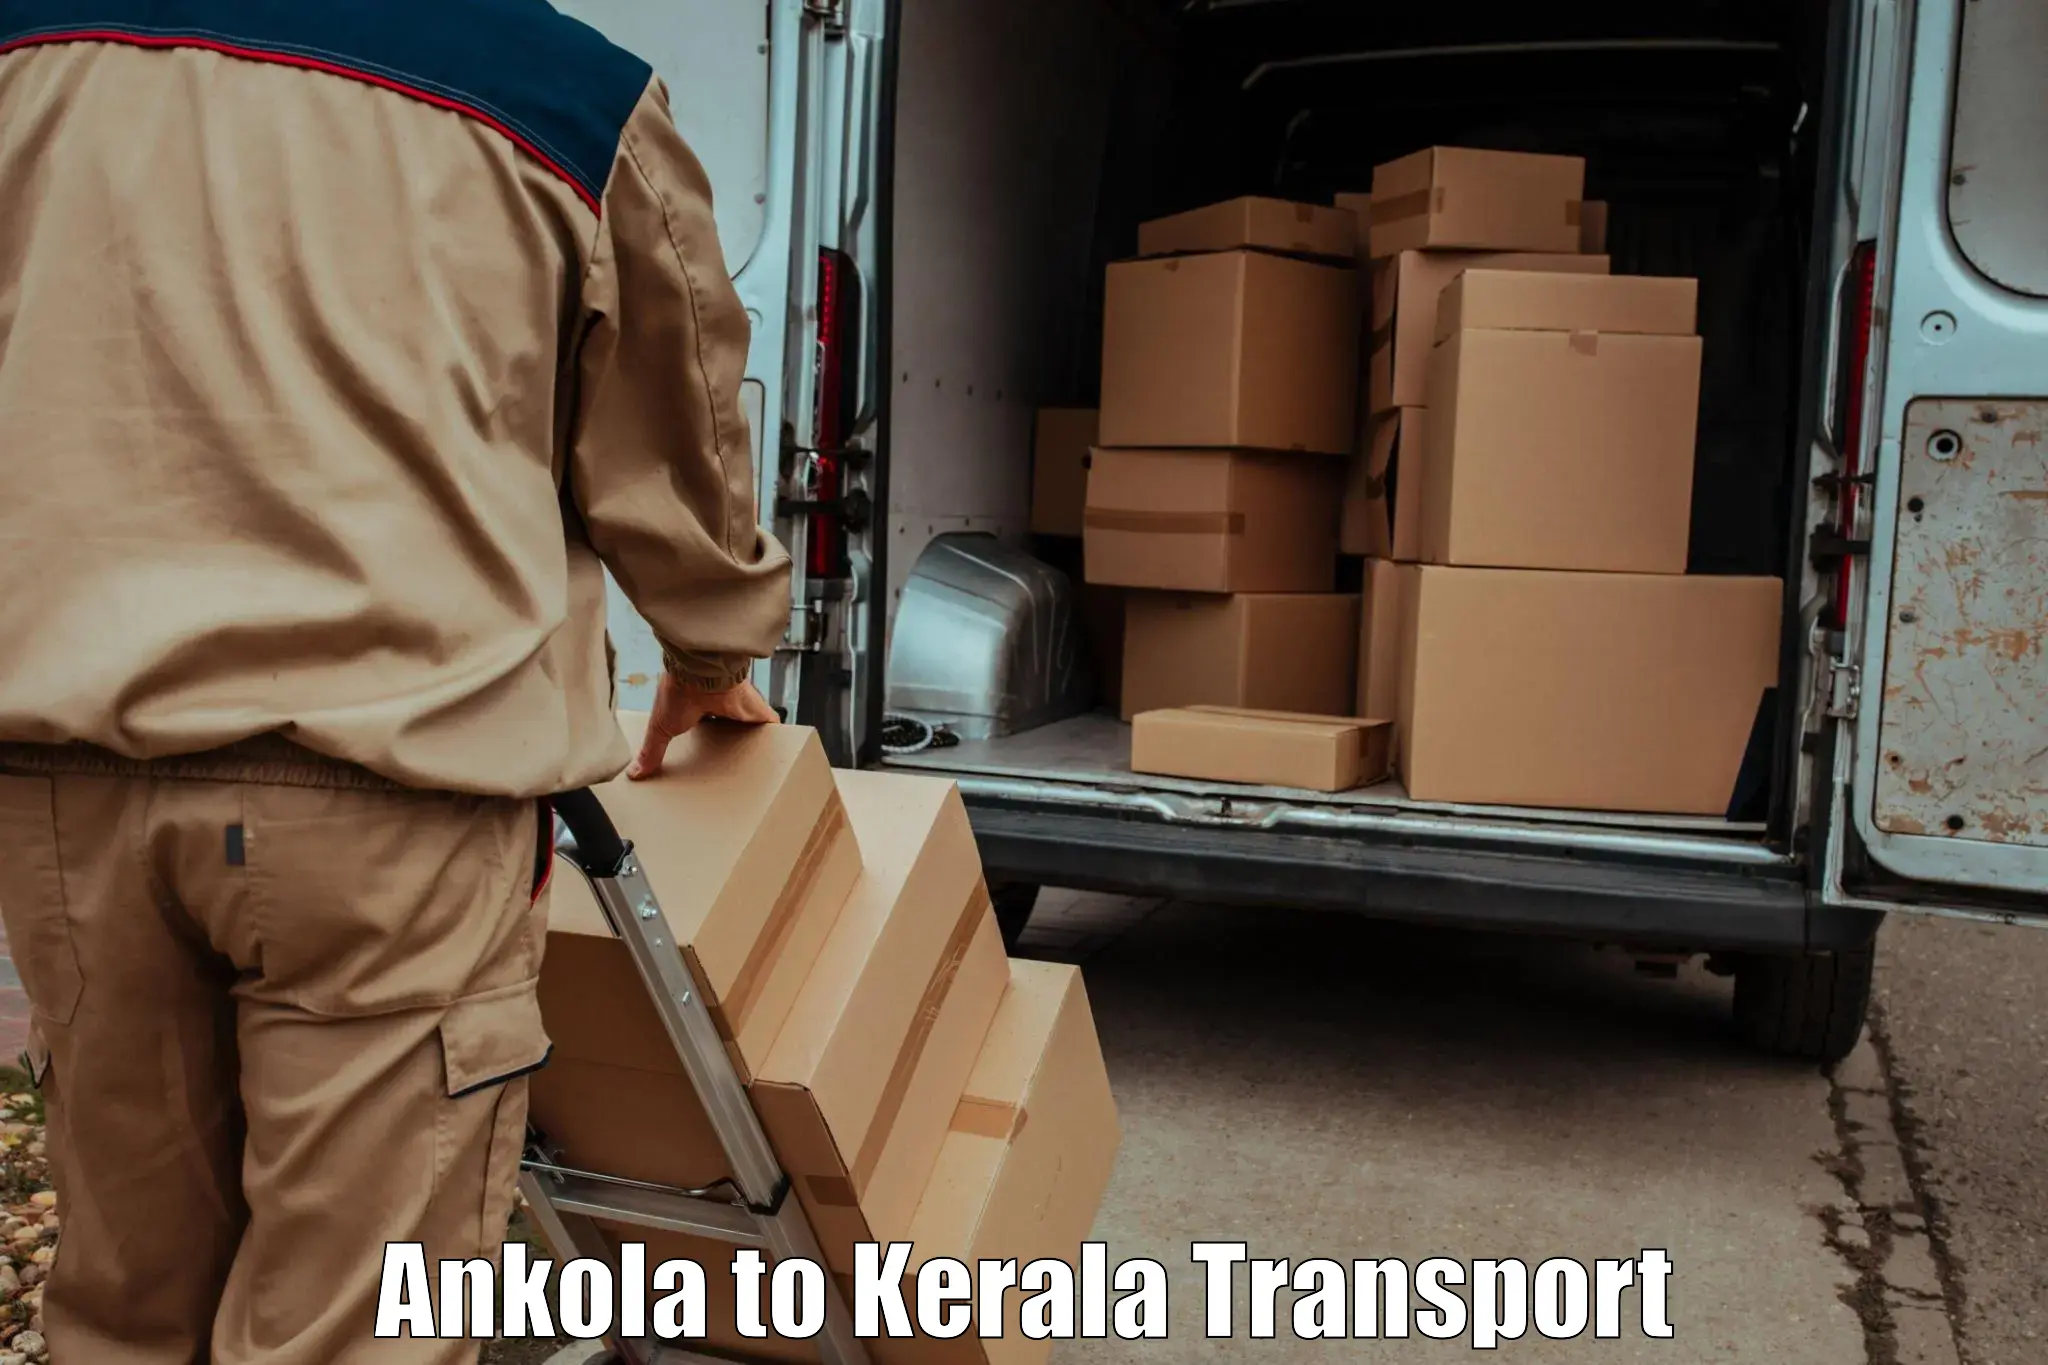 Land transport services Ankola to Cochin University of Science and Technology